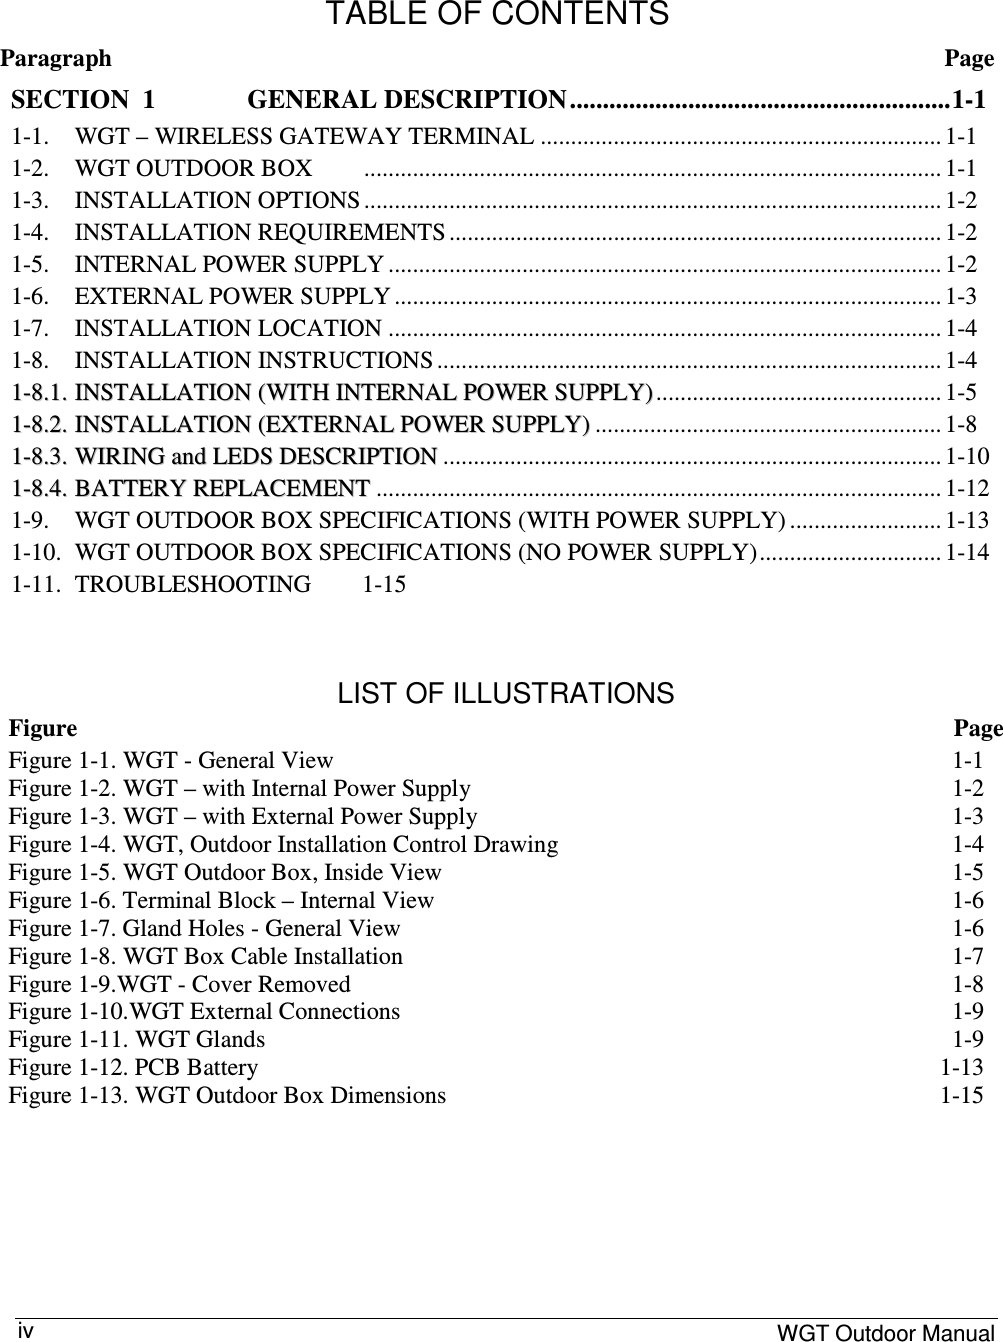     WGT Outdoor Manual  iv  TABLE OF CONTENTS Paragraph  Page SECTION  1 GENERAL DESCRIPTION..........................................................1-1 1-1.  WGT – WIRELESS GATEWAY TERMINAL .................................................................. 1-1 1-2.  WGT OUTDOOR BOX  ............................................................................................... 1-1 1-3.  INSTALLATION OPTIONS ............................................................................................... 1-2 1-4.  INSTALLATION REQUIREMENTS ................................................................................. 1-2 1-5.  INTERNAL POWER SUPPLY ........................................................................................... 1-2 1-6.  EXTERNAL POWER SUPPLY .......................................................................................... 1-3 1-7.  INSTALLATION LOCATION ........................................................................................... 1-4 1-8.  INSTALLATION INSTRUCTIONS ................................................................................... 1-4 11--88..11.. IINNSSTTAALLLLAATTIIOONN  ((WWIITTHH  IINNTTEERRNNAALL  PPOOWWEERR  SSUUPPPPLLYY))............................................... 1-5 11--88..22.. IINNSSTTAALLLLAATTIIOONN  ((EEXXTTEERRNNAALL  PPOOWWEERR  SSUUPPPPLLYY)) ......................................................... 1-8 11--88..33.. WWIIRRIINNGG  aanndd  LLEEDDSS  DDEESSCCRRIIPPTTIIOONN .................................................................................. 1-10 11--88..44.. BBAATTTTEERRYY  RREEPPLLAACCEEMMEENNTT ............................................................................................. 1-12 1-9.  WGT OUTDOOR BOX SPECIFICATIONS (WITH POWER SUPPLY) ......................... 1-13 1-10.  WGT OUTDOOR BOX SPECIFICATIONS (NO POWER SUPPLY).............................. 1-14 1-11.  TROUBLESHOOTING  1-15    LIST OF ILLUSTRATIONS Figure  Page Figure  1-1. WGT - General View  1-1 Figure  1-2. WGT – with Internal Power Supply  1-2 Figure  1-3. WGT – with External Power Supply  1-3 Figure  1-4. WGT, Outdoor Installation Control Drawing  1-4 Figure  1-5. WGT Outdoor Box, Inside View  1-5 Figure  1-6. Terminal Block – Internal View  1-6 Figure  1-7. Gland Holes - General View  1-6 Figure  1-8. WGT Box Cable Installation  1-7 Figure  1-9.WGT - Cover Removed  1-8 Figure  1-10.WGT External Connections  1-9 Figure  1-11. WGT Glands  1-9 Figure  1-12. PCB Battery  1-13 Figure  1-13. WGT Outdoor Box Dimensions  1-15         